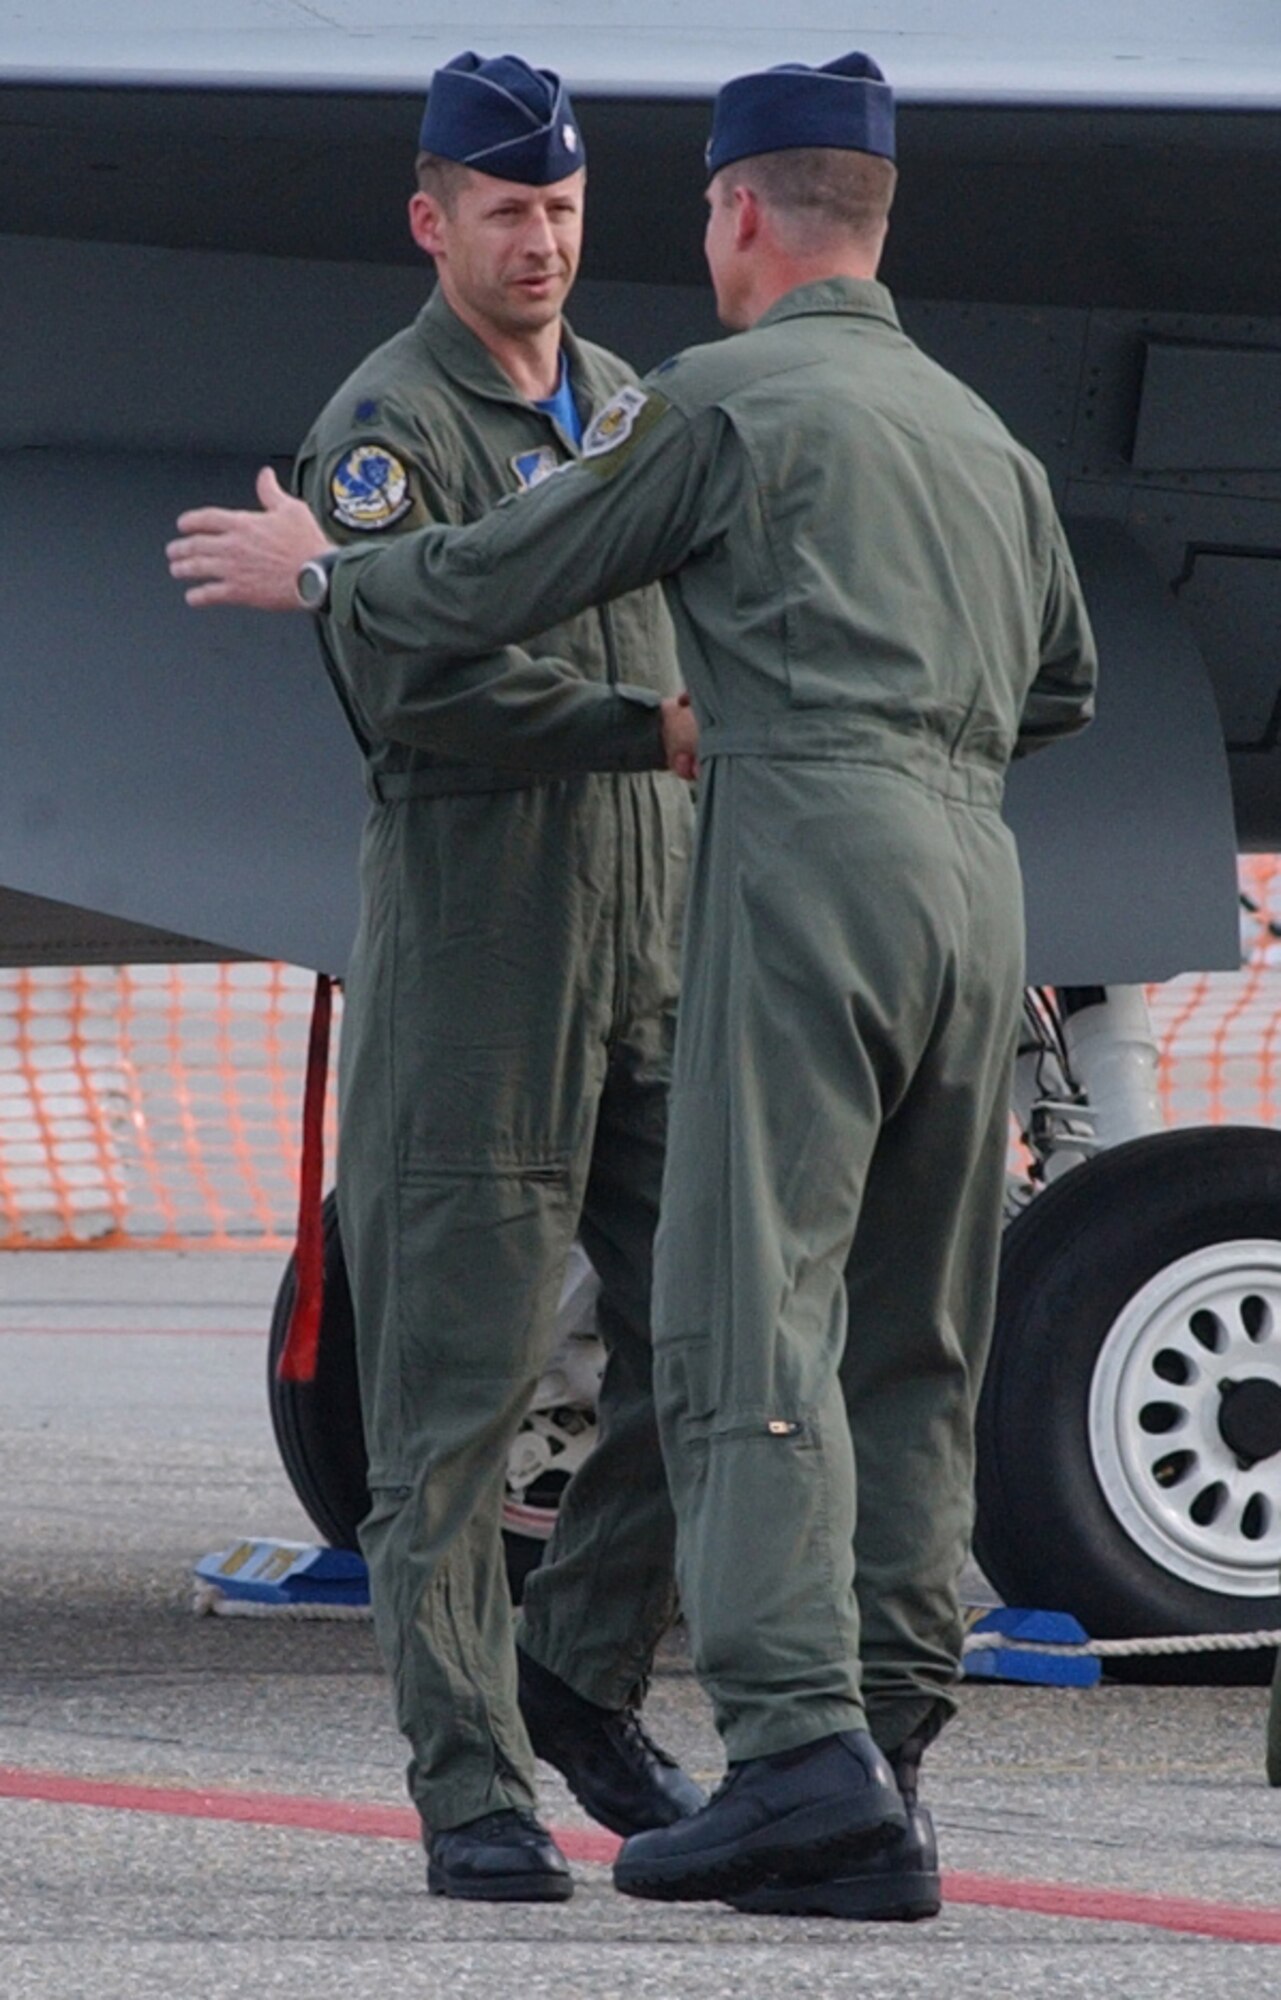 EIELSON AIR FORCE BASE, Alaska--Lt. Col. Deiter Bareihs, 18th Fighter Squadron commander, and Lt. Col. Quentin Rideout, 355th FS commander, shake hands after their A-10 and F-16 flyover for a flag-folding ceremony June 23. The ceremony marked the de-activation of the 355th FS and the  18FS. (U.S. Air Force photo by Senior Airman Justin Weaver)